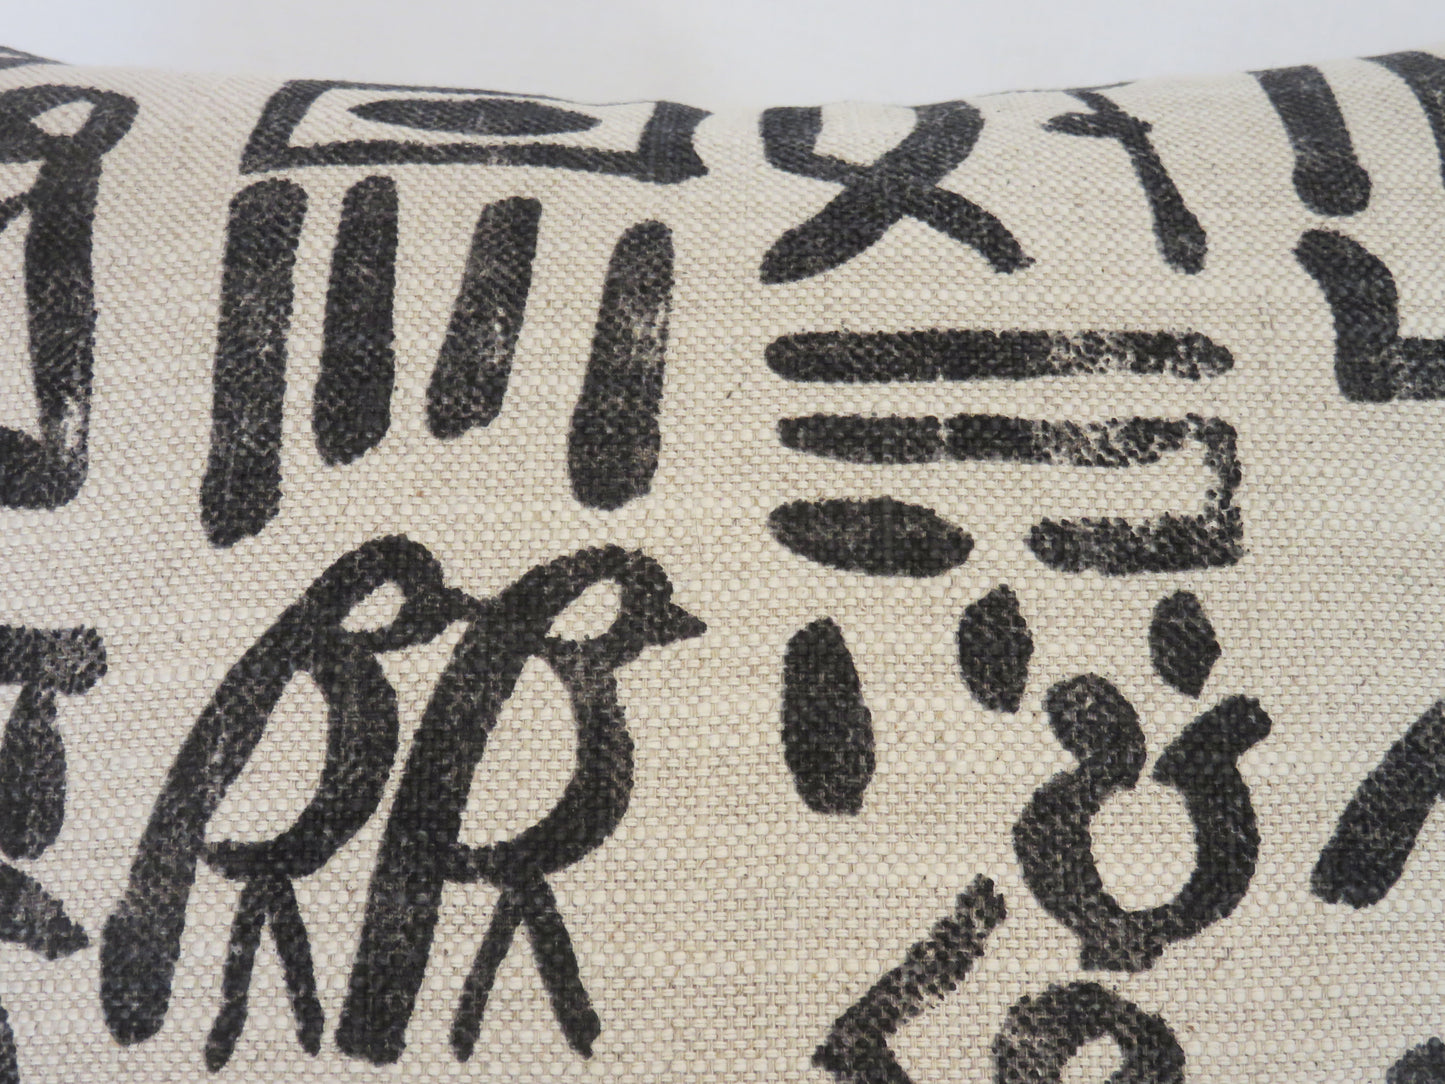 Hieroglyph Print Pillow Cover, Natural Cream and Charcoal Black, Birds, People, Symbols